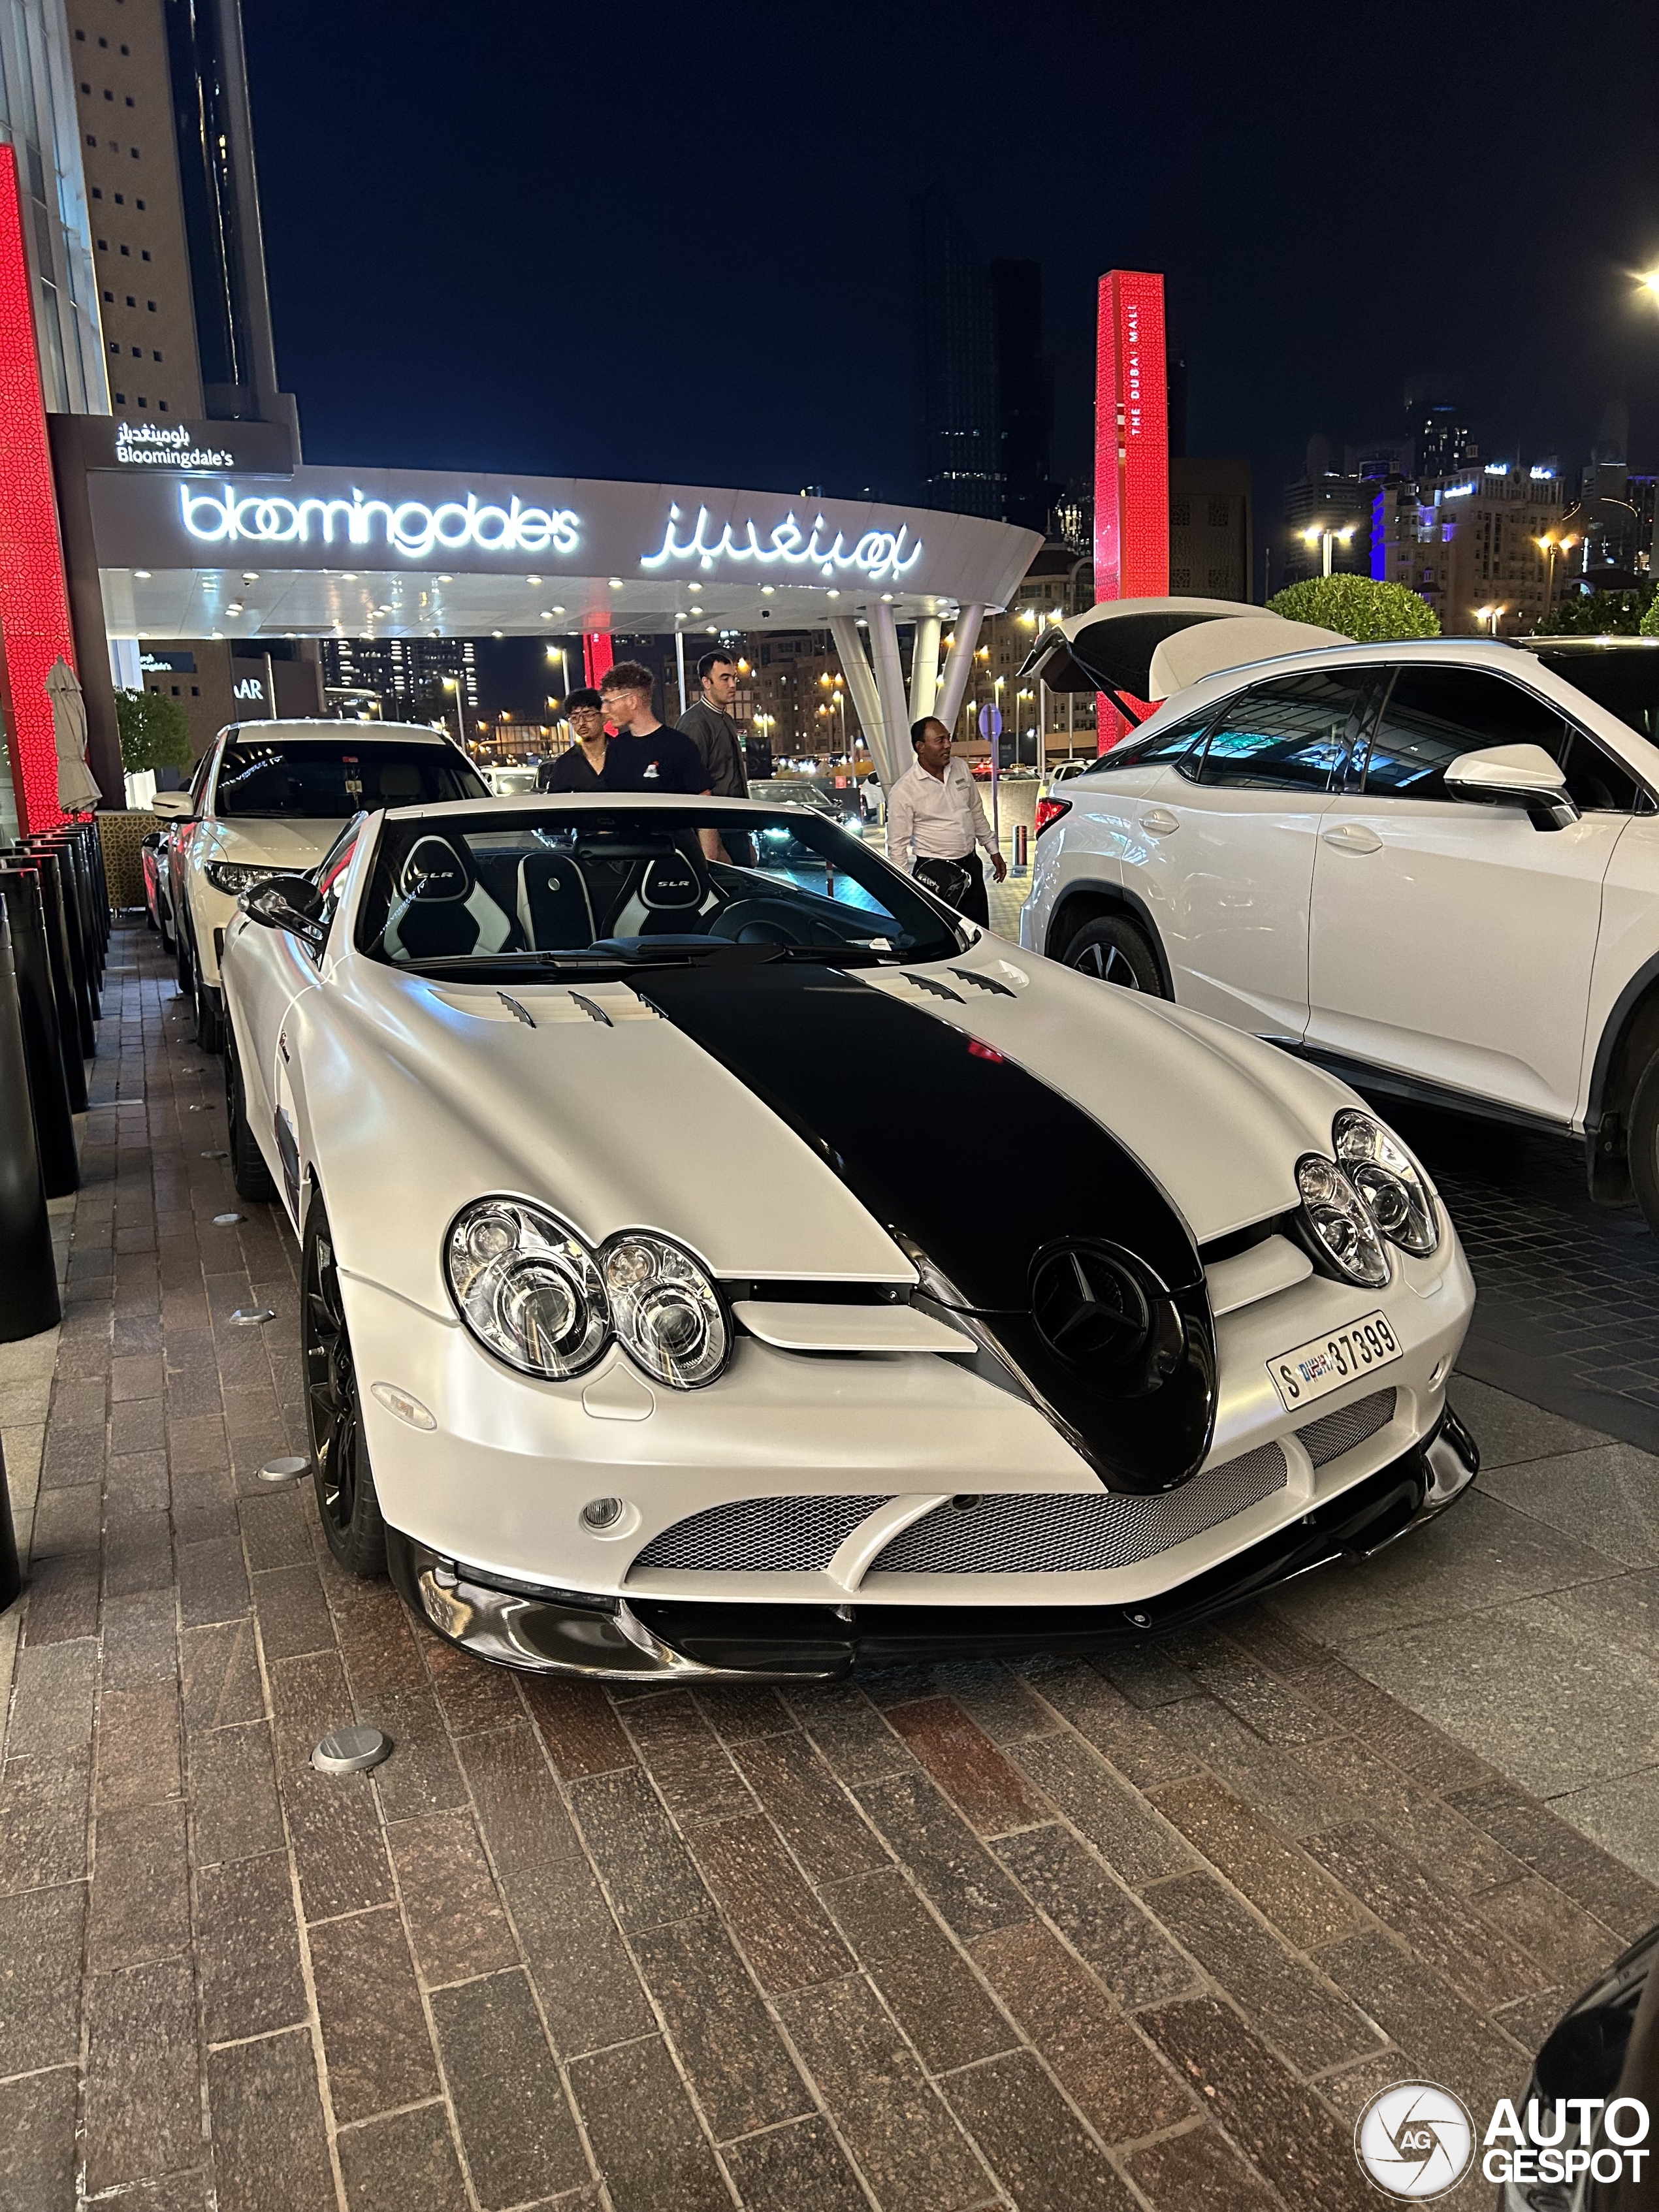 This SLR is placed where it belongs.